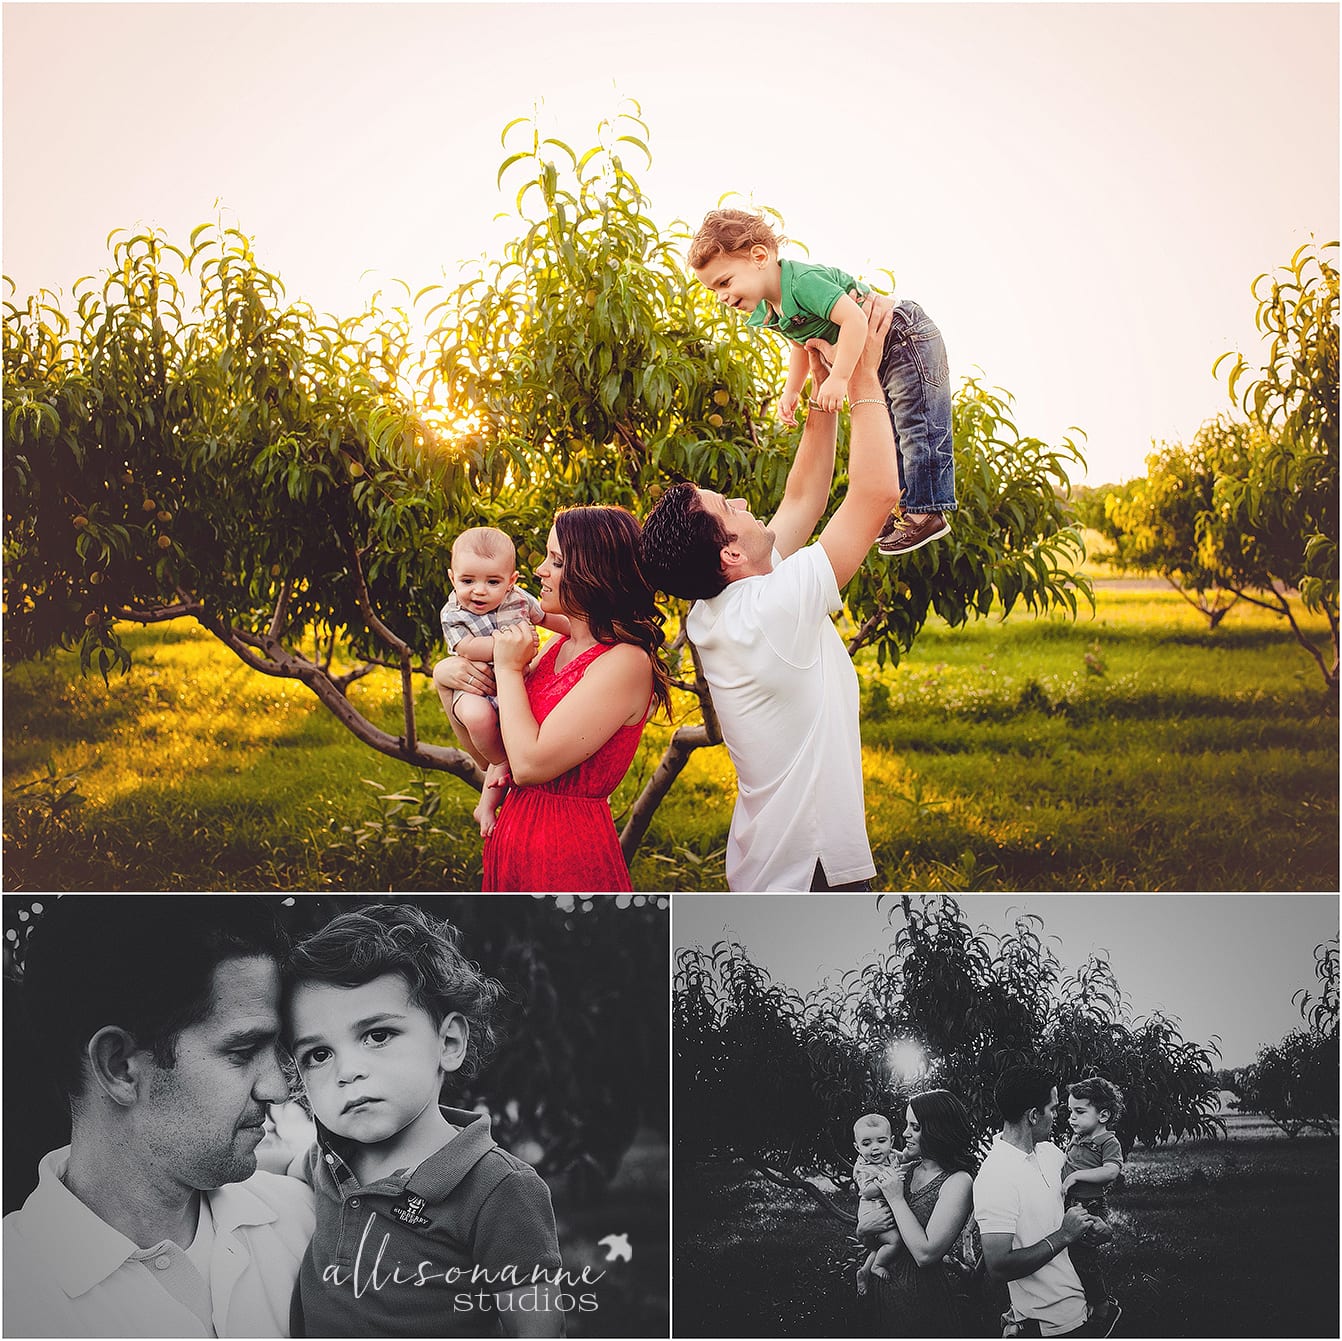 Burberry, peach orchards, AllisonAnne Studios, First Year Journey Package, returning customers, brothers, family, love, Hammonton, best family photographer